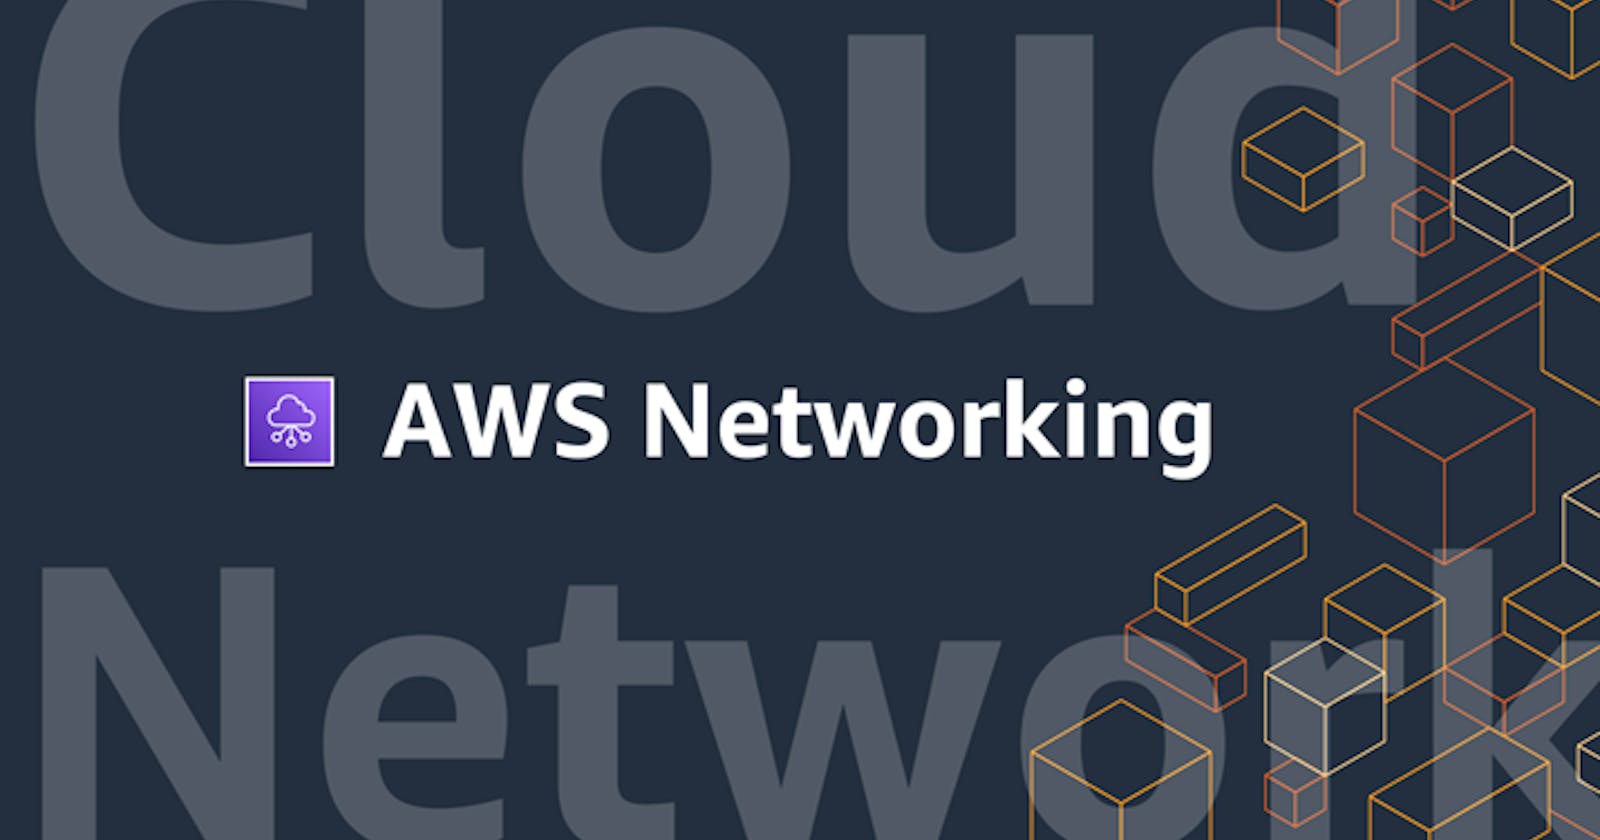 Day 10 of AWS essentials